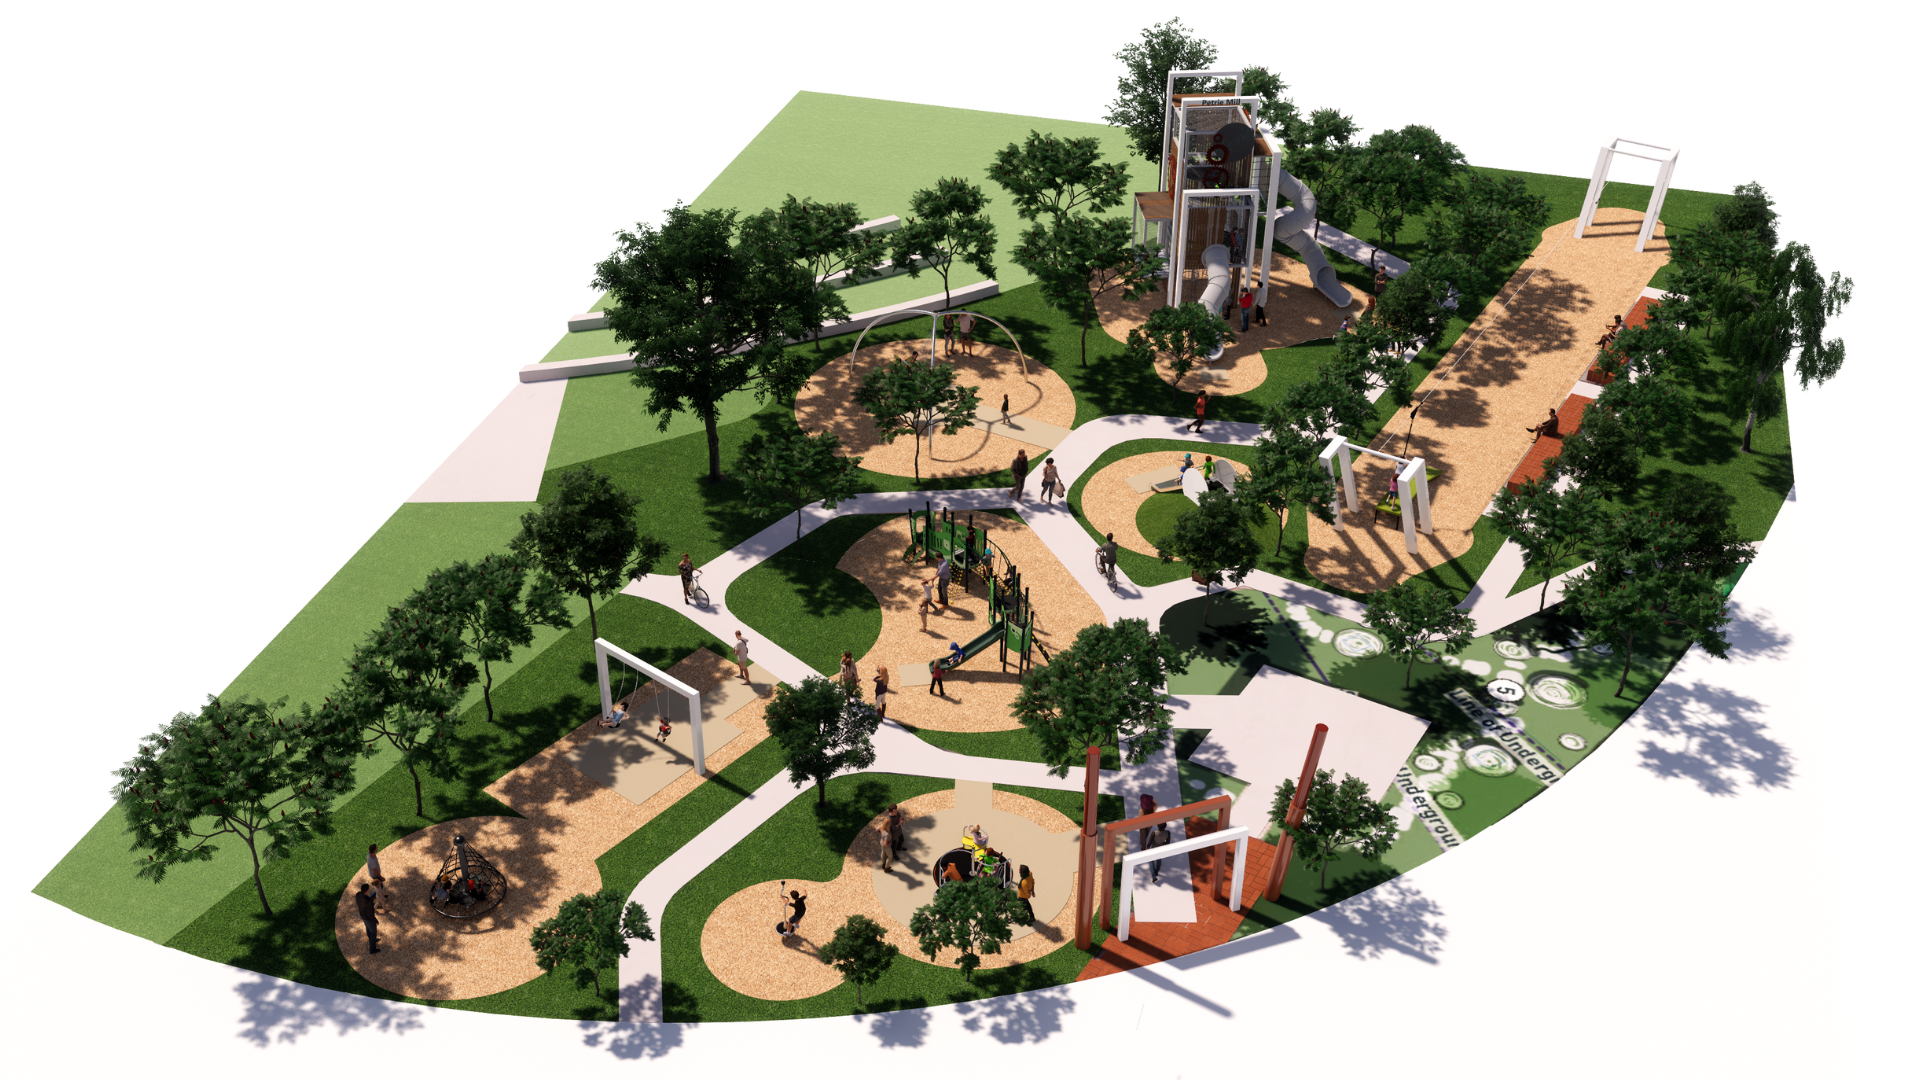 Petrie Mill Playground Design and Site Plan